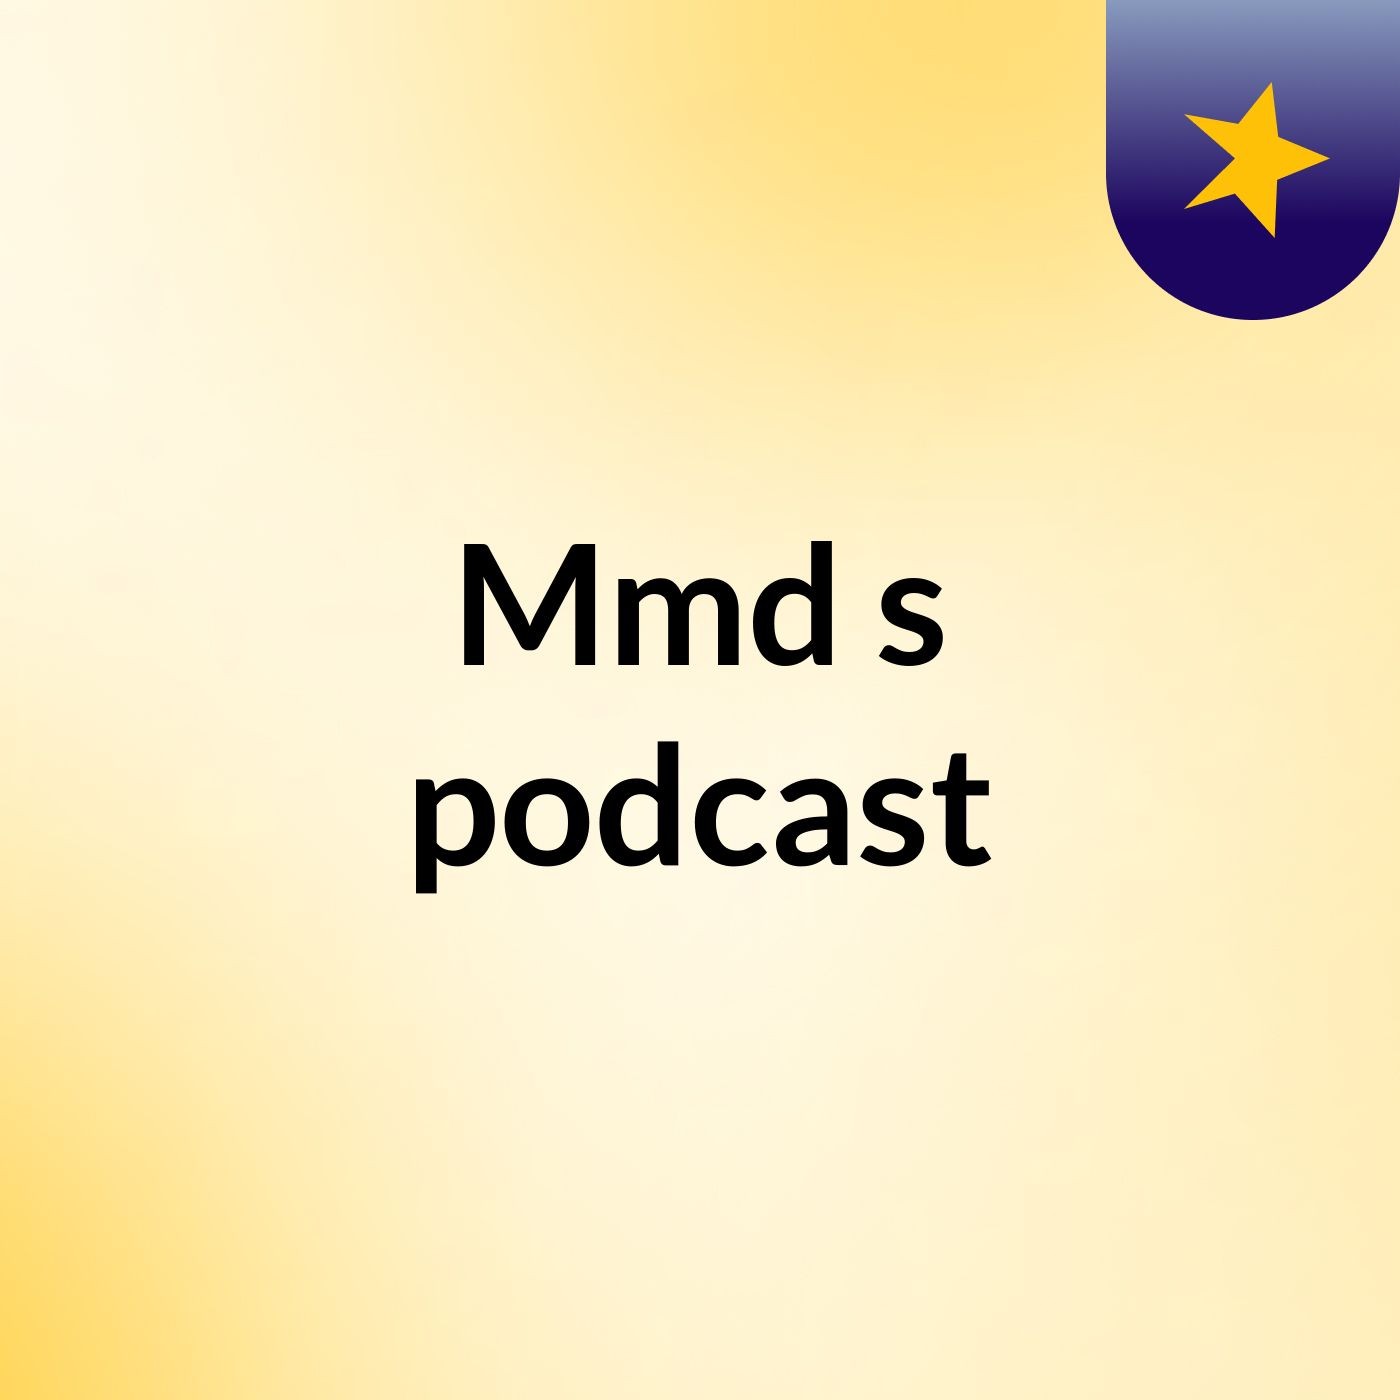 Episode 2 - Mmd's podcast